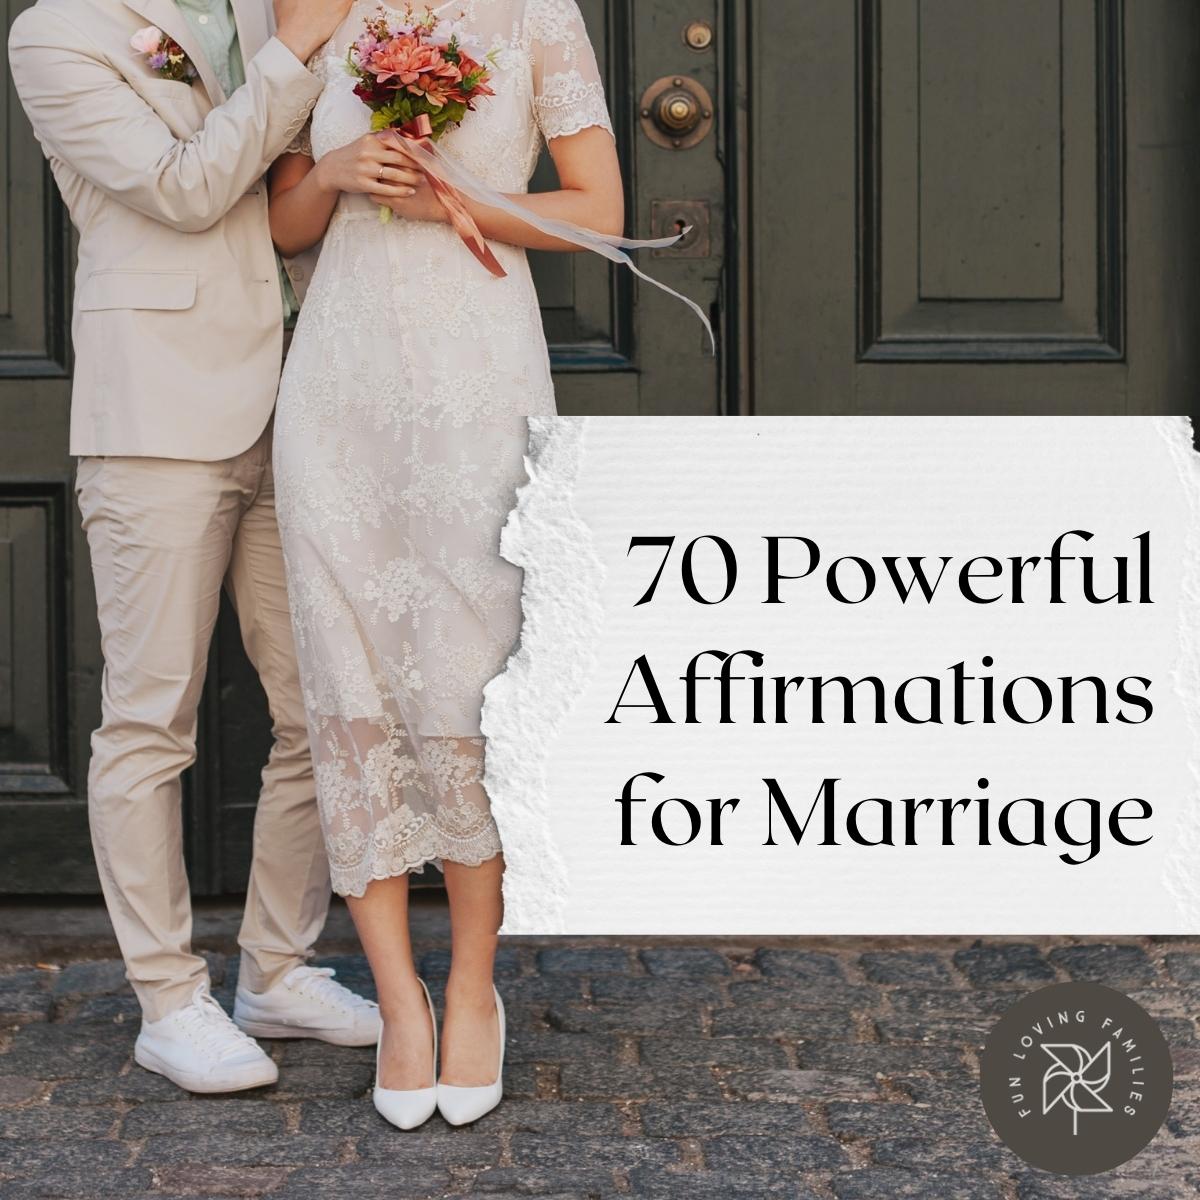 70 Powerful Affirmations for Marriage